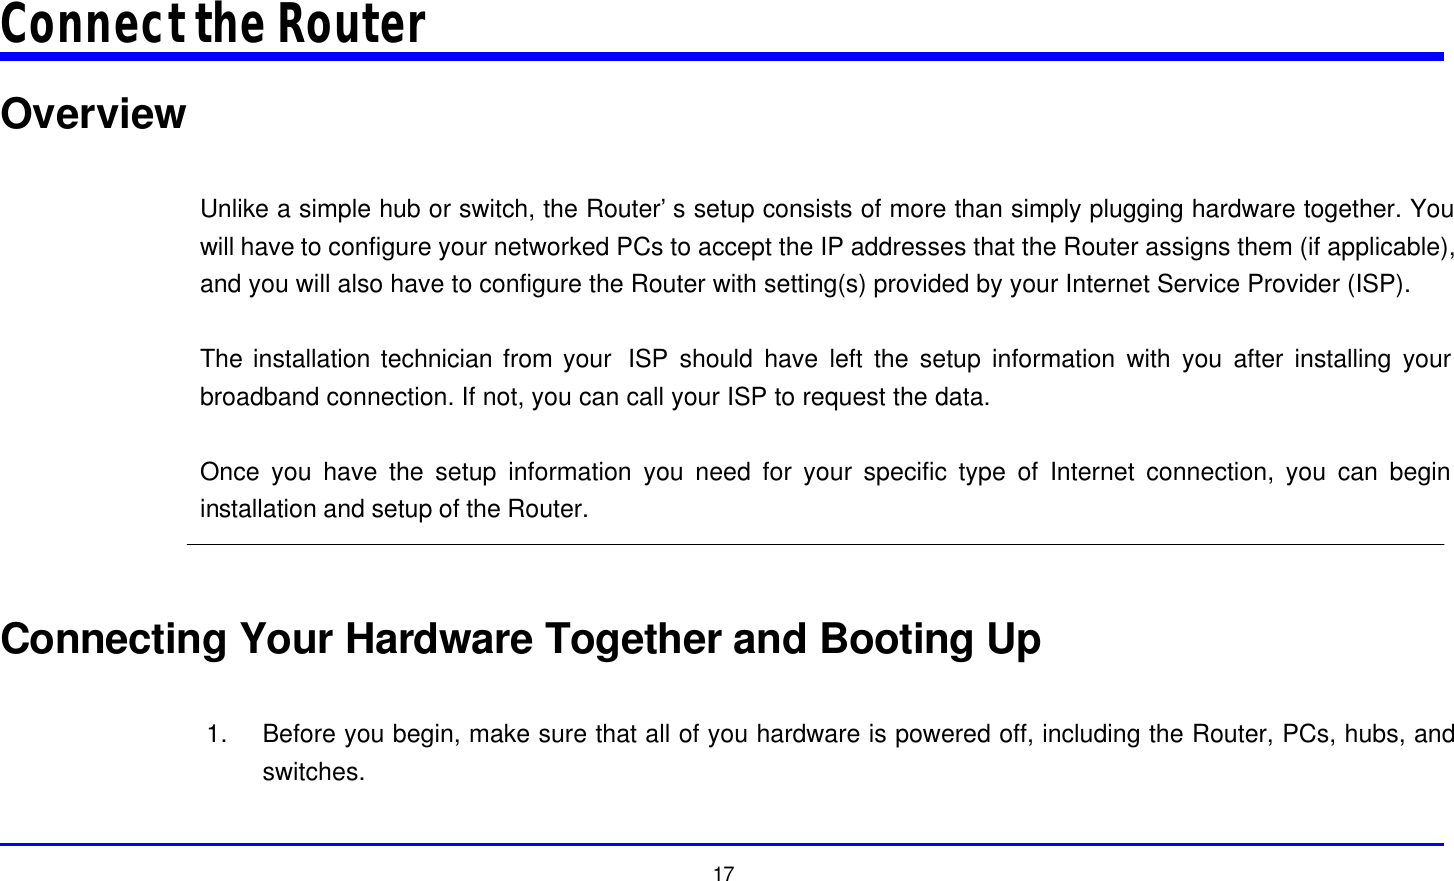  17 Connect the Router Overview  Unlike a simple hub or switch, the Router’s setup consists of more than simply plugging hardware together. You will have to configure your networked PCs to accept the IP addresses that the Router assigns them (if applicable), and you will also have to configure the Router with setting(s) provided by your Internet Service Provider (ISP).  The installation technician from your  ISP should have left the setup information with you after installing your broadband connection. If not, you can call your ISP to request the data.  Once you have the setup information you need for your specific type of Internet connection, you can begin installation and setup of the Router.   Connecting Your Hardware Together and Booting Up  1. Before you begin, make sure that all of you hardware is powered off, including the Router, PCs, hubs, and switches.  